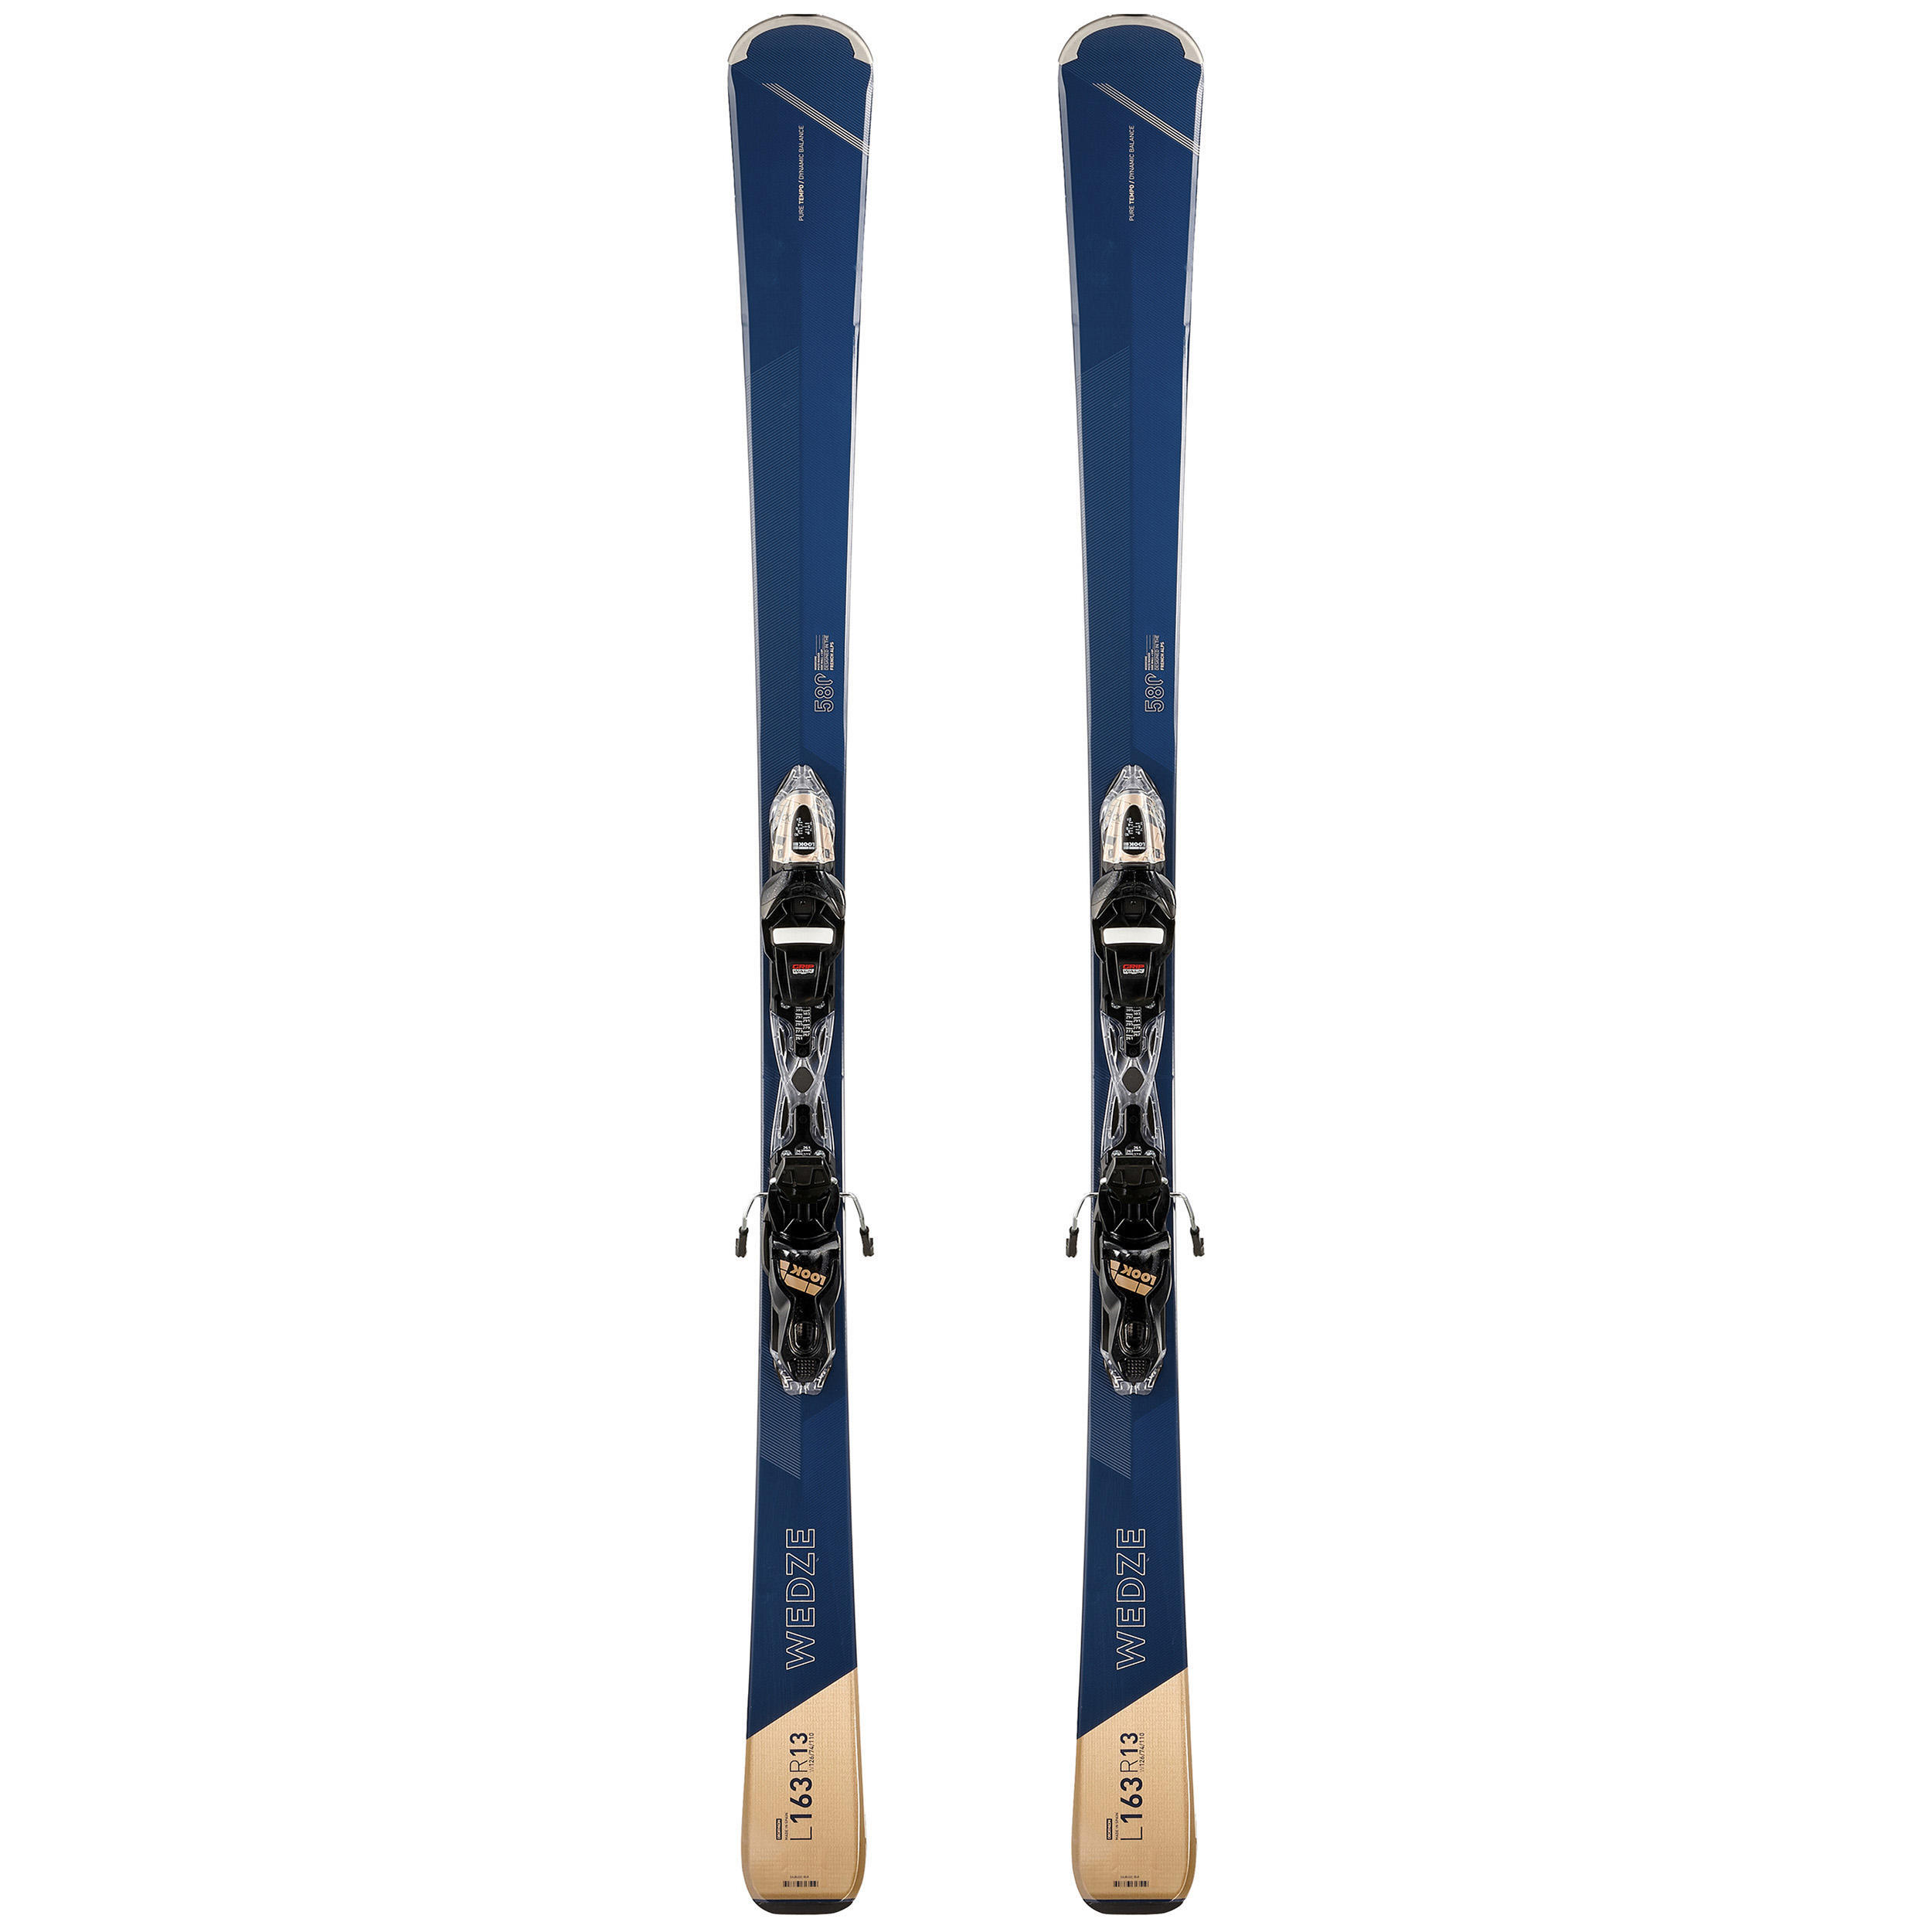 WOMEN’S ALPINE SKIS WITH BINDING - BOOST 580 - NAVY BLUE 1/7